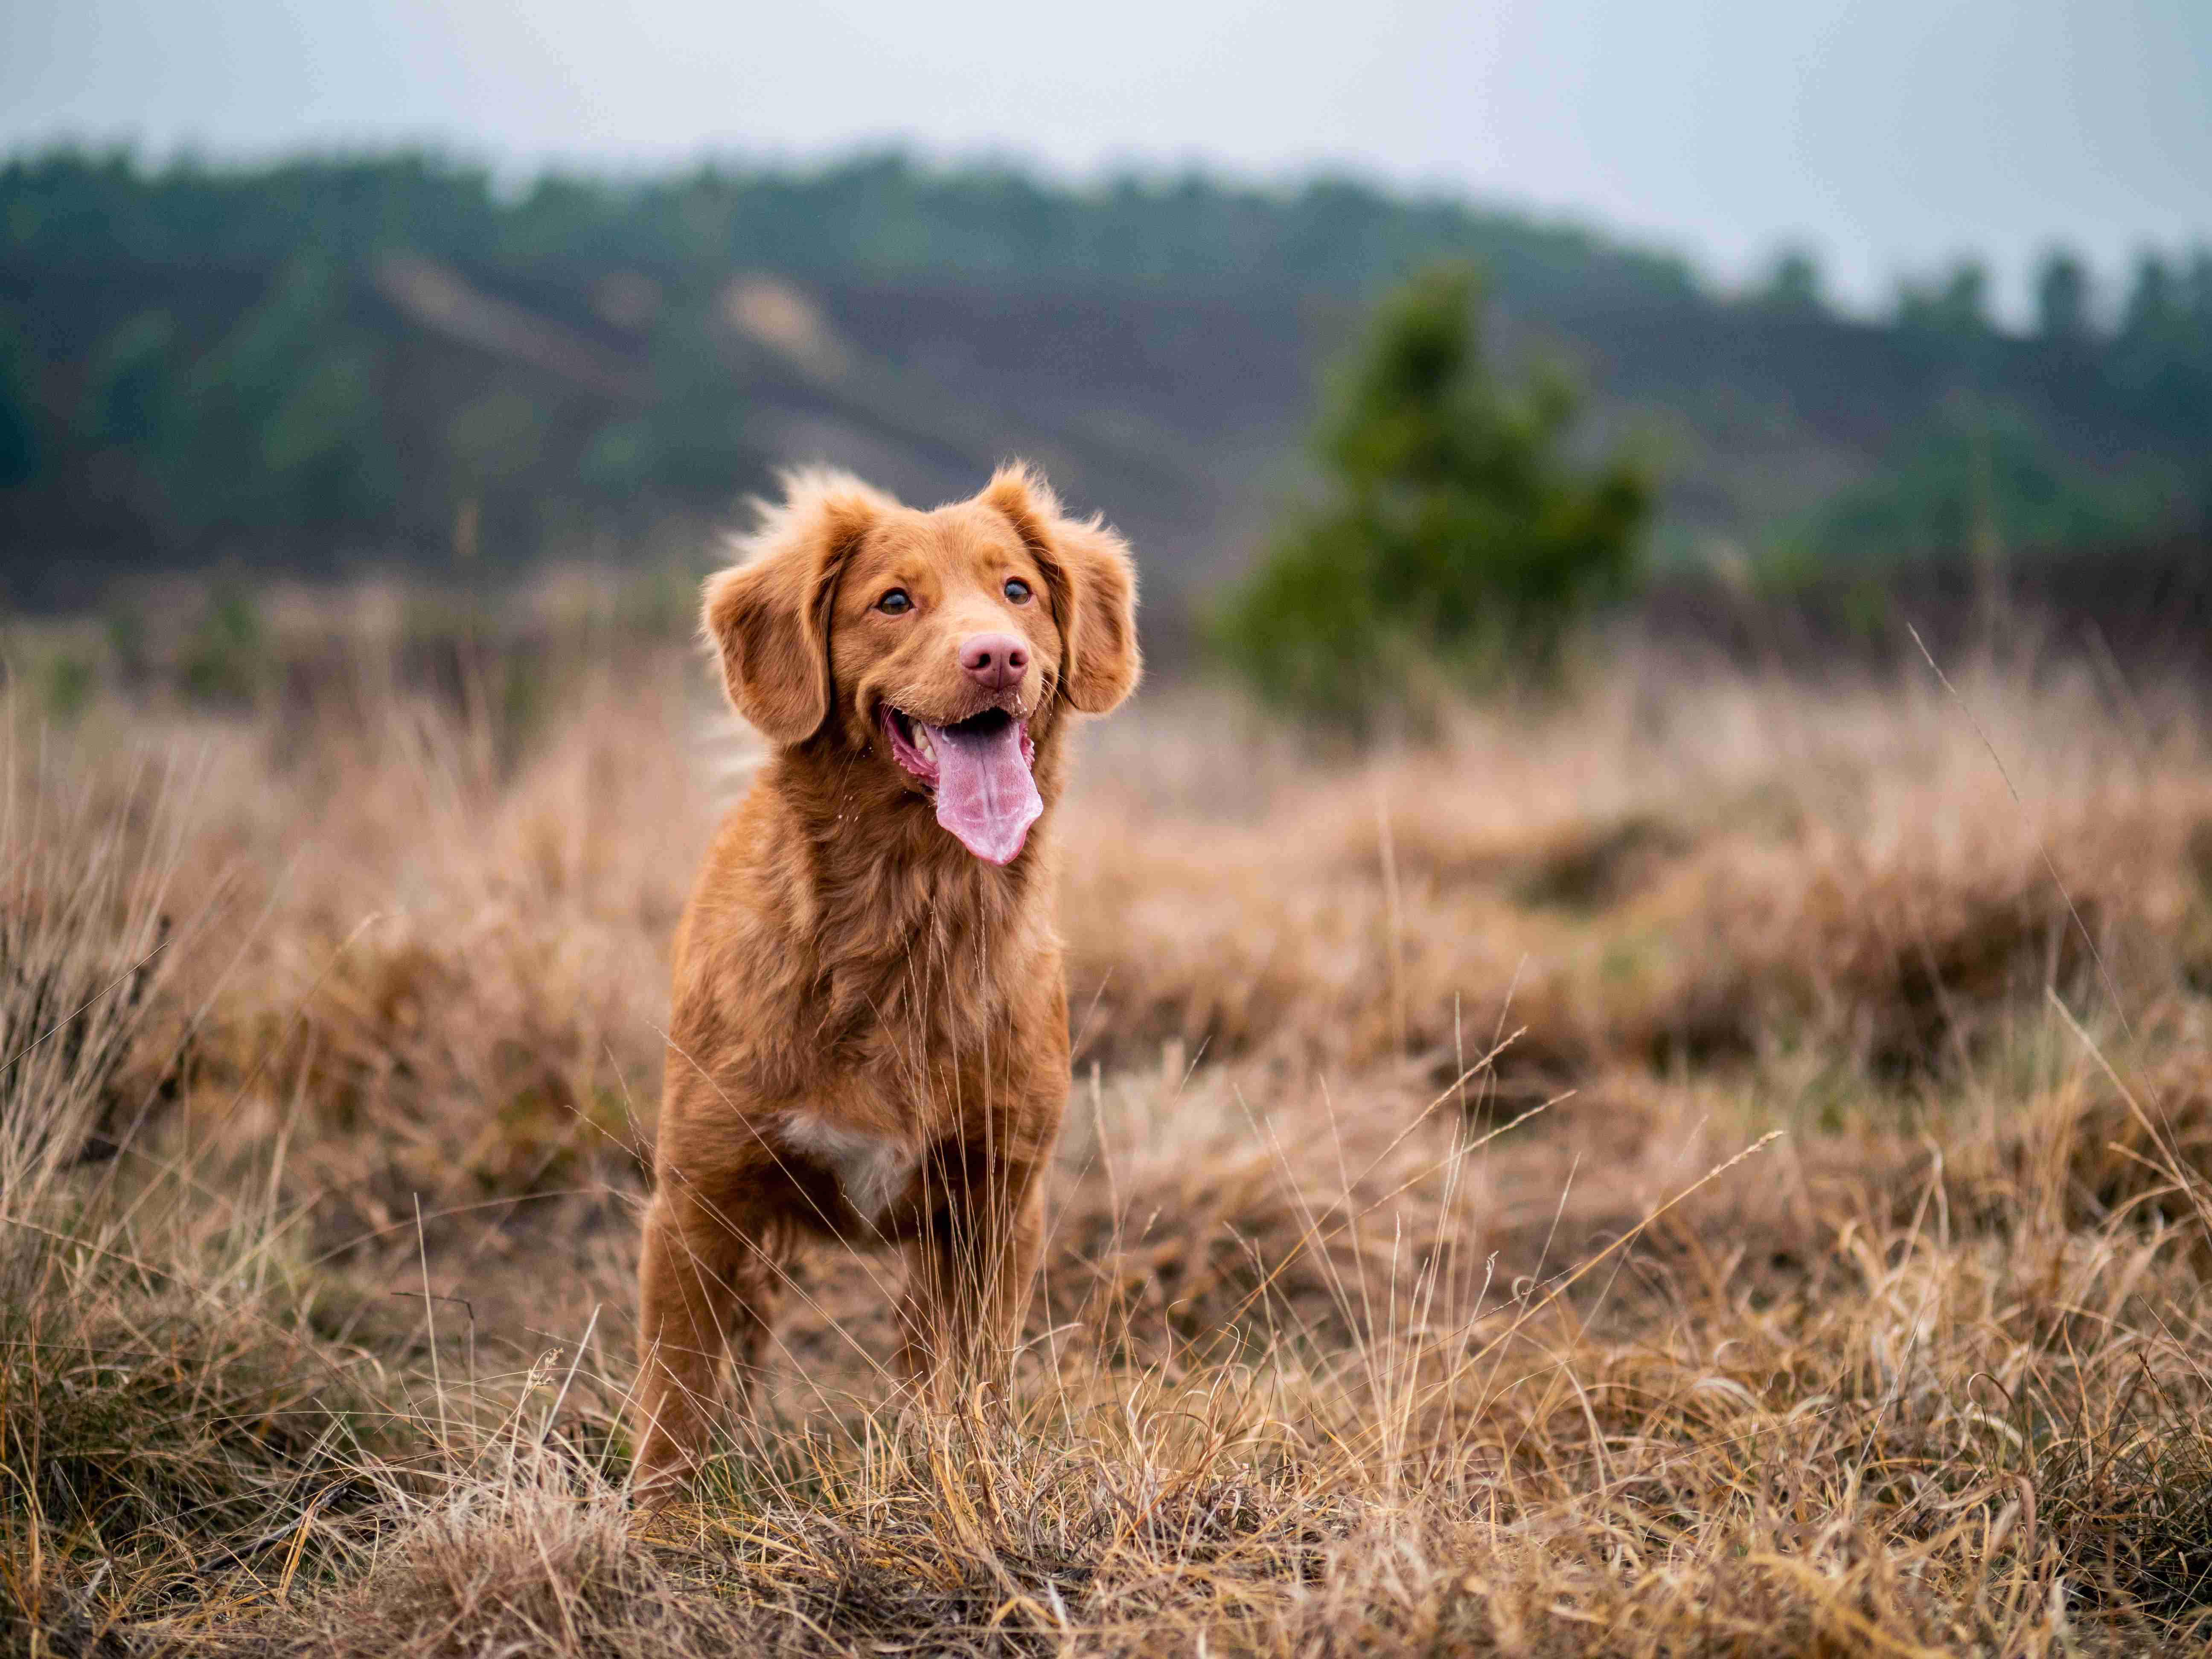 Golden Retriever Breeding: How Often is Safe and Responsible?